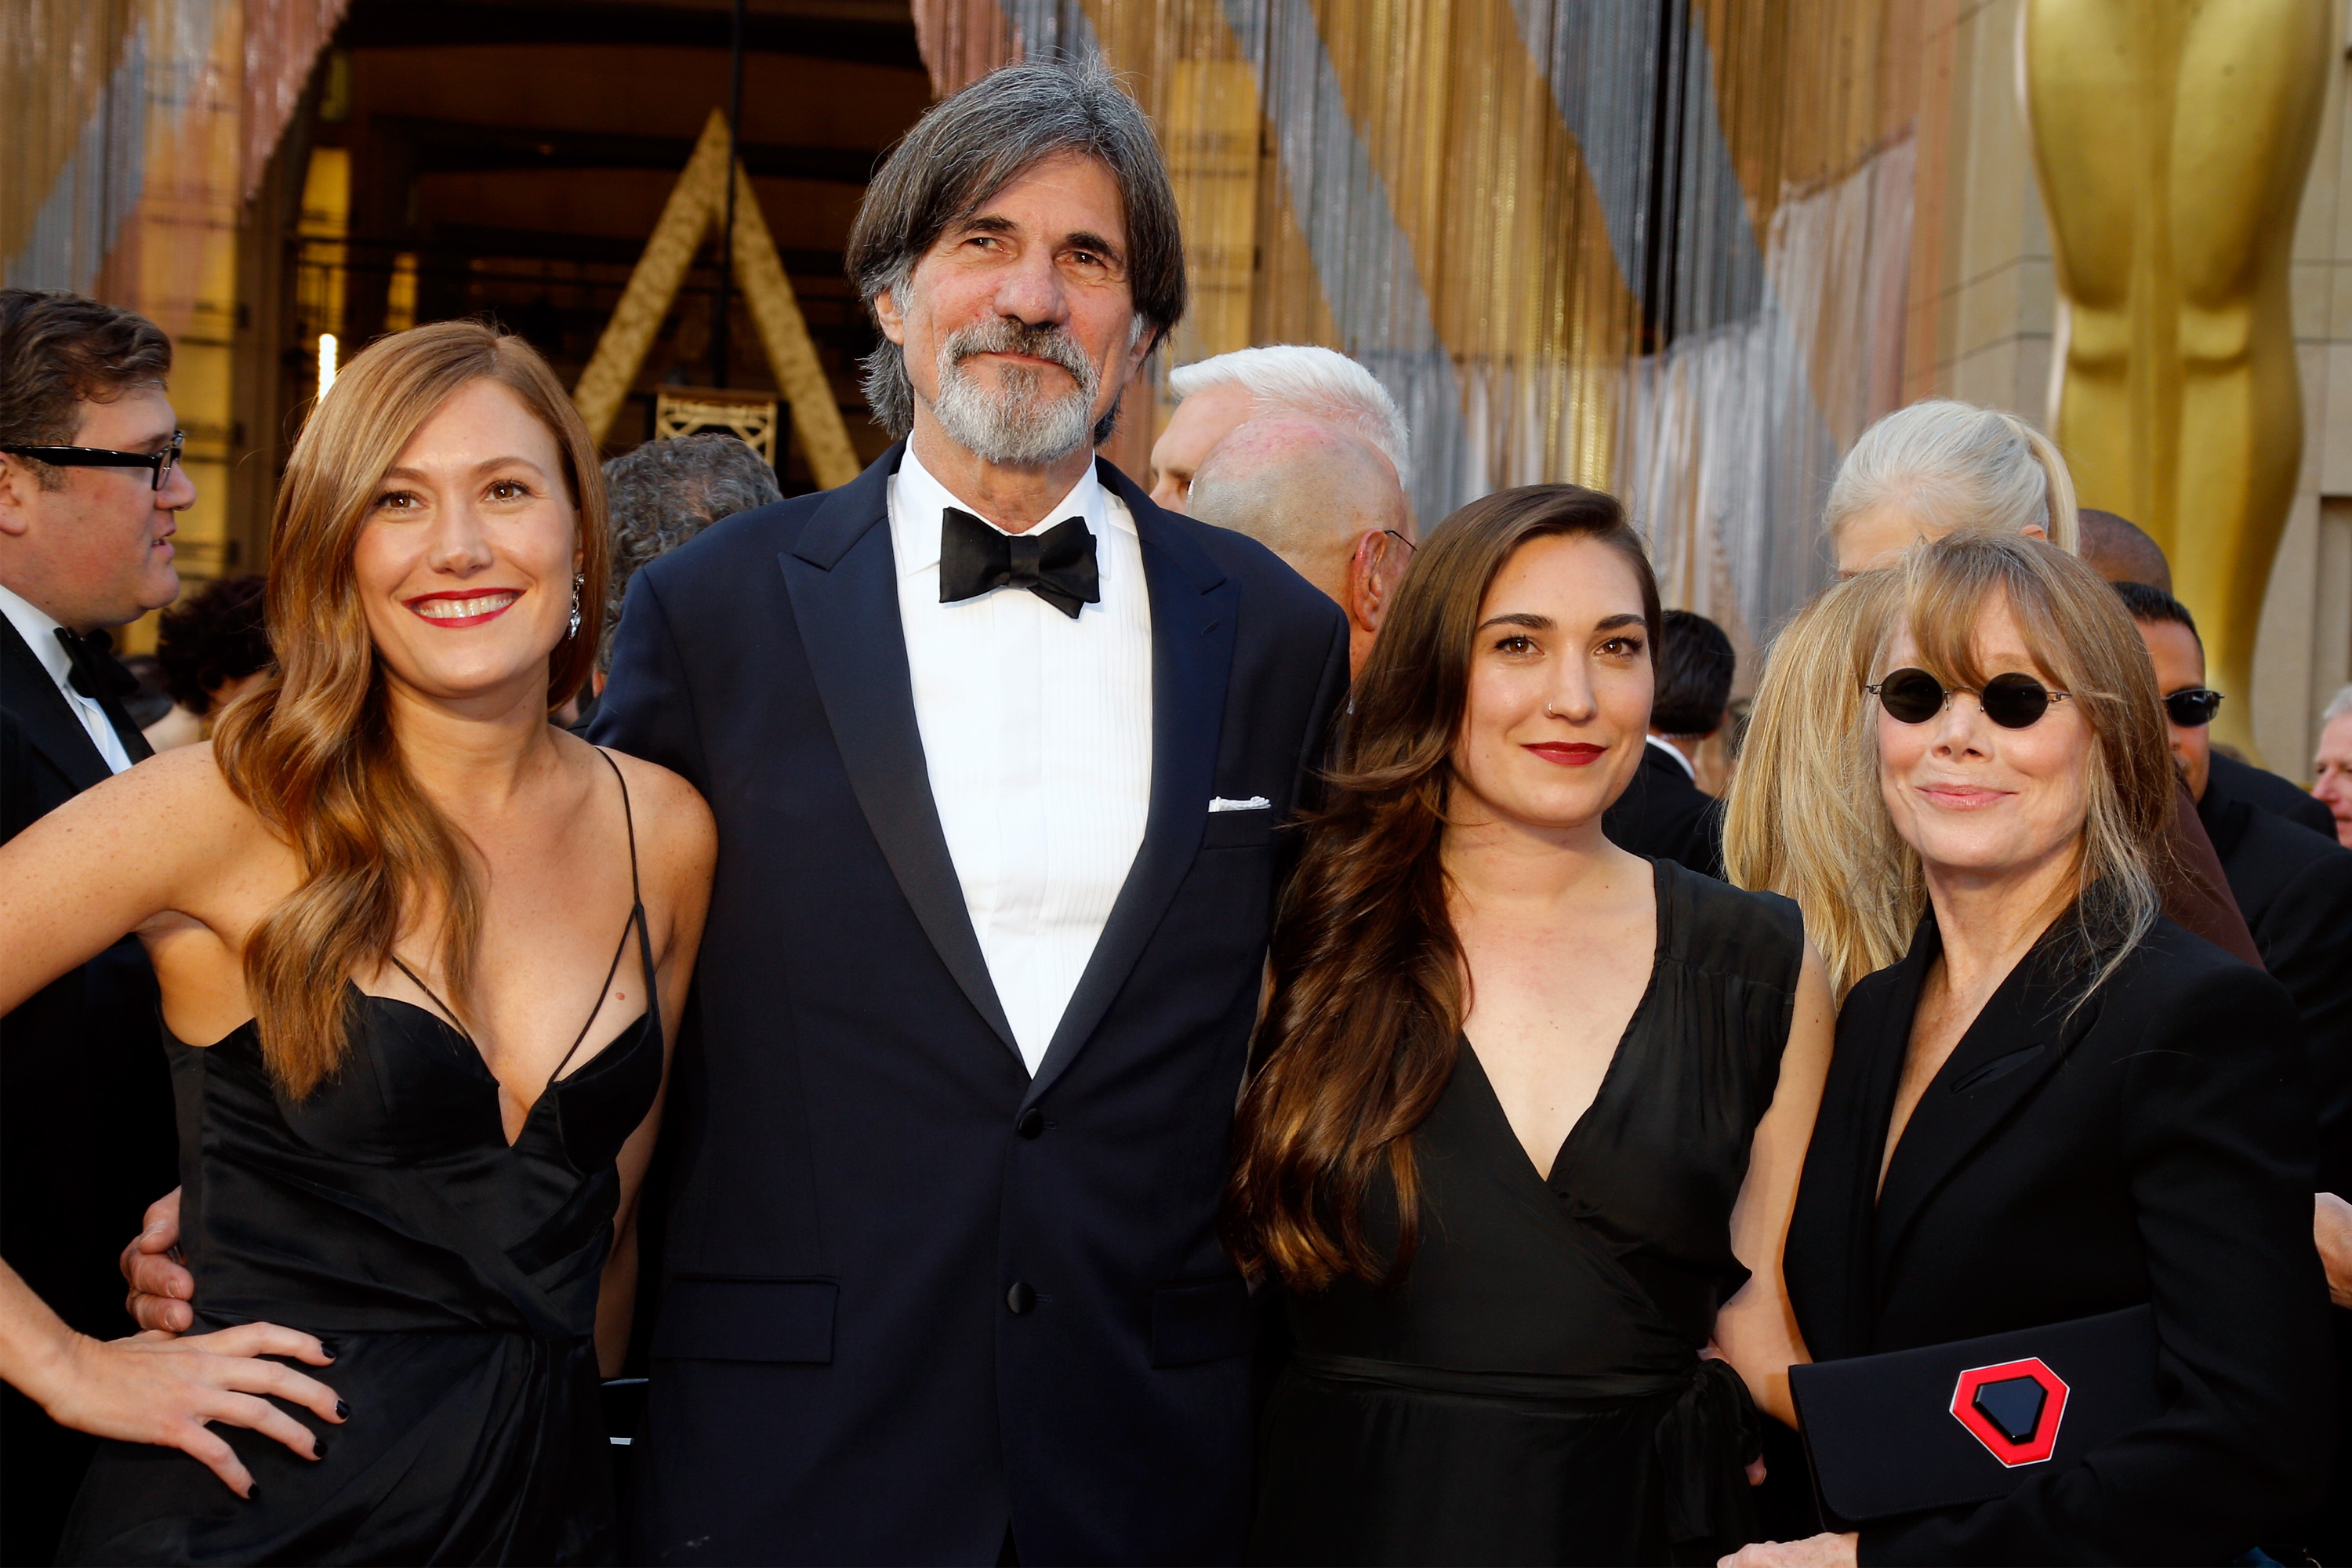 Schuyler Fisk, Jack Fisk, Madison Fisk, and Sissy Spacek during the 88th Annual Academy Awards at Hollywood & Highland Center on February 28, 2016, in Hollywood, California. | Source: Getty Images